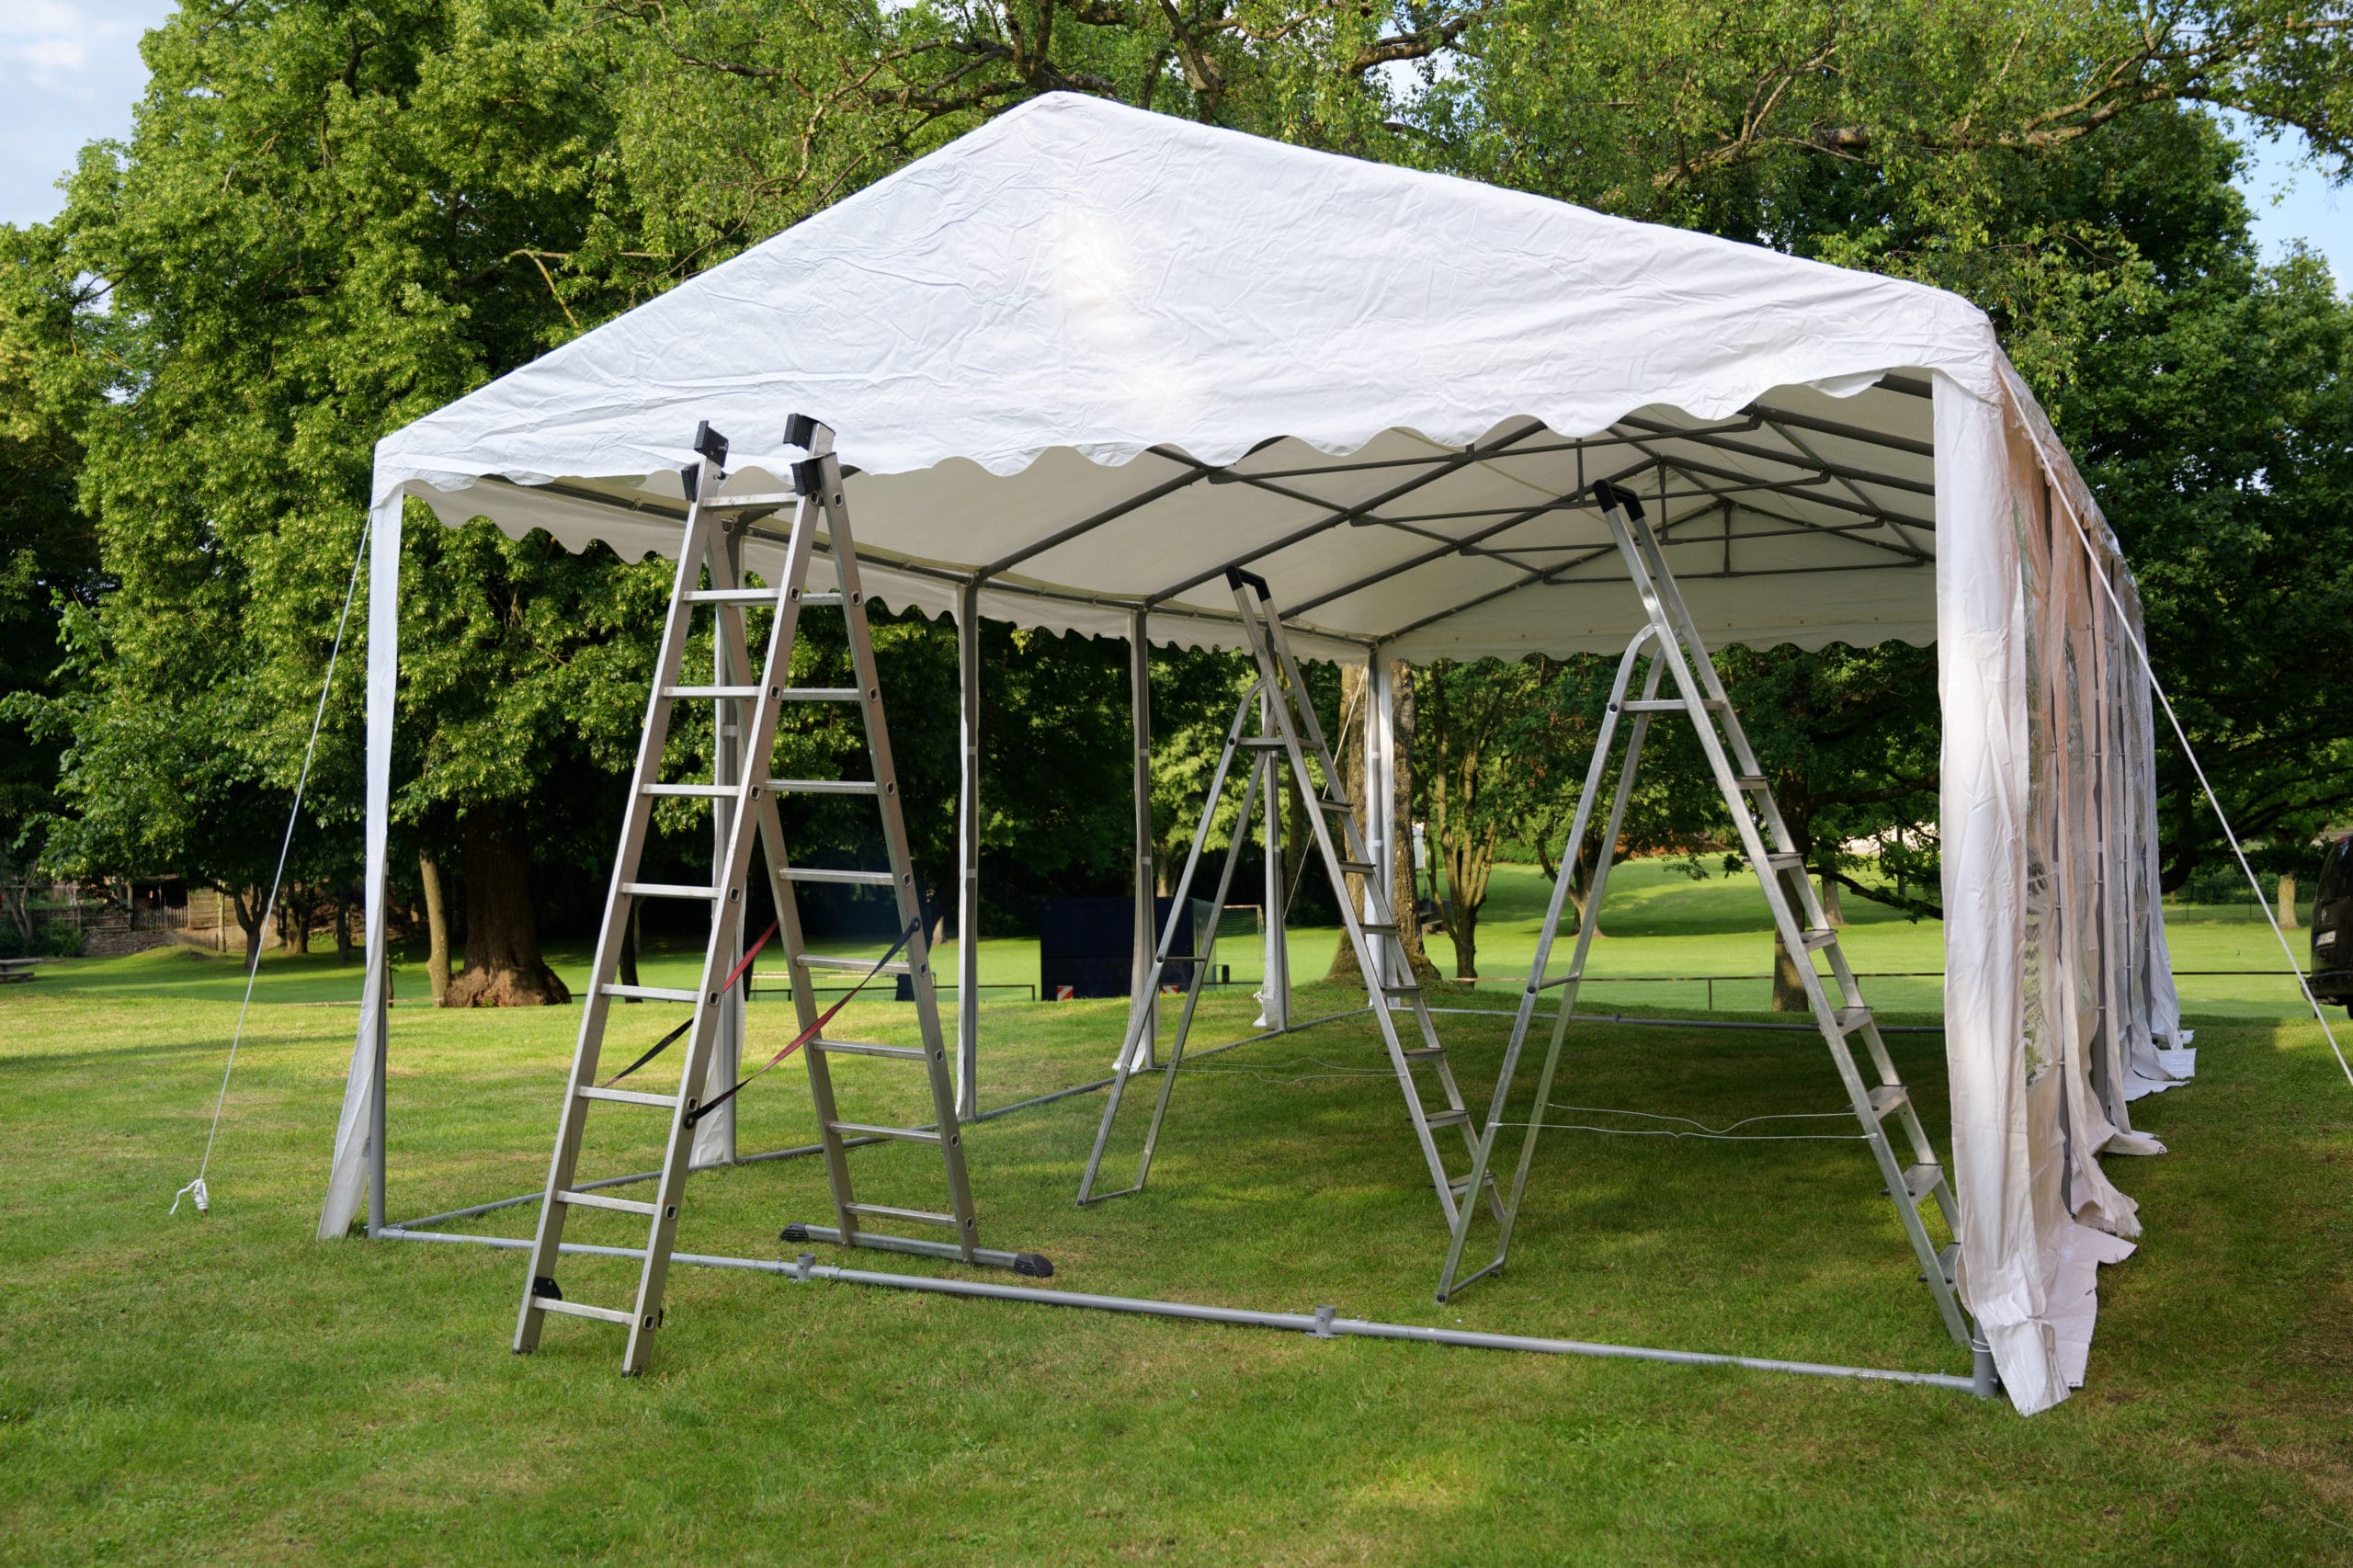 COVID Party Solutions – MA Tent Rentals for Days